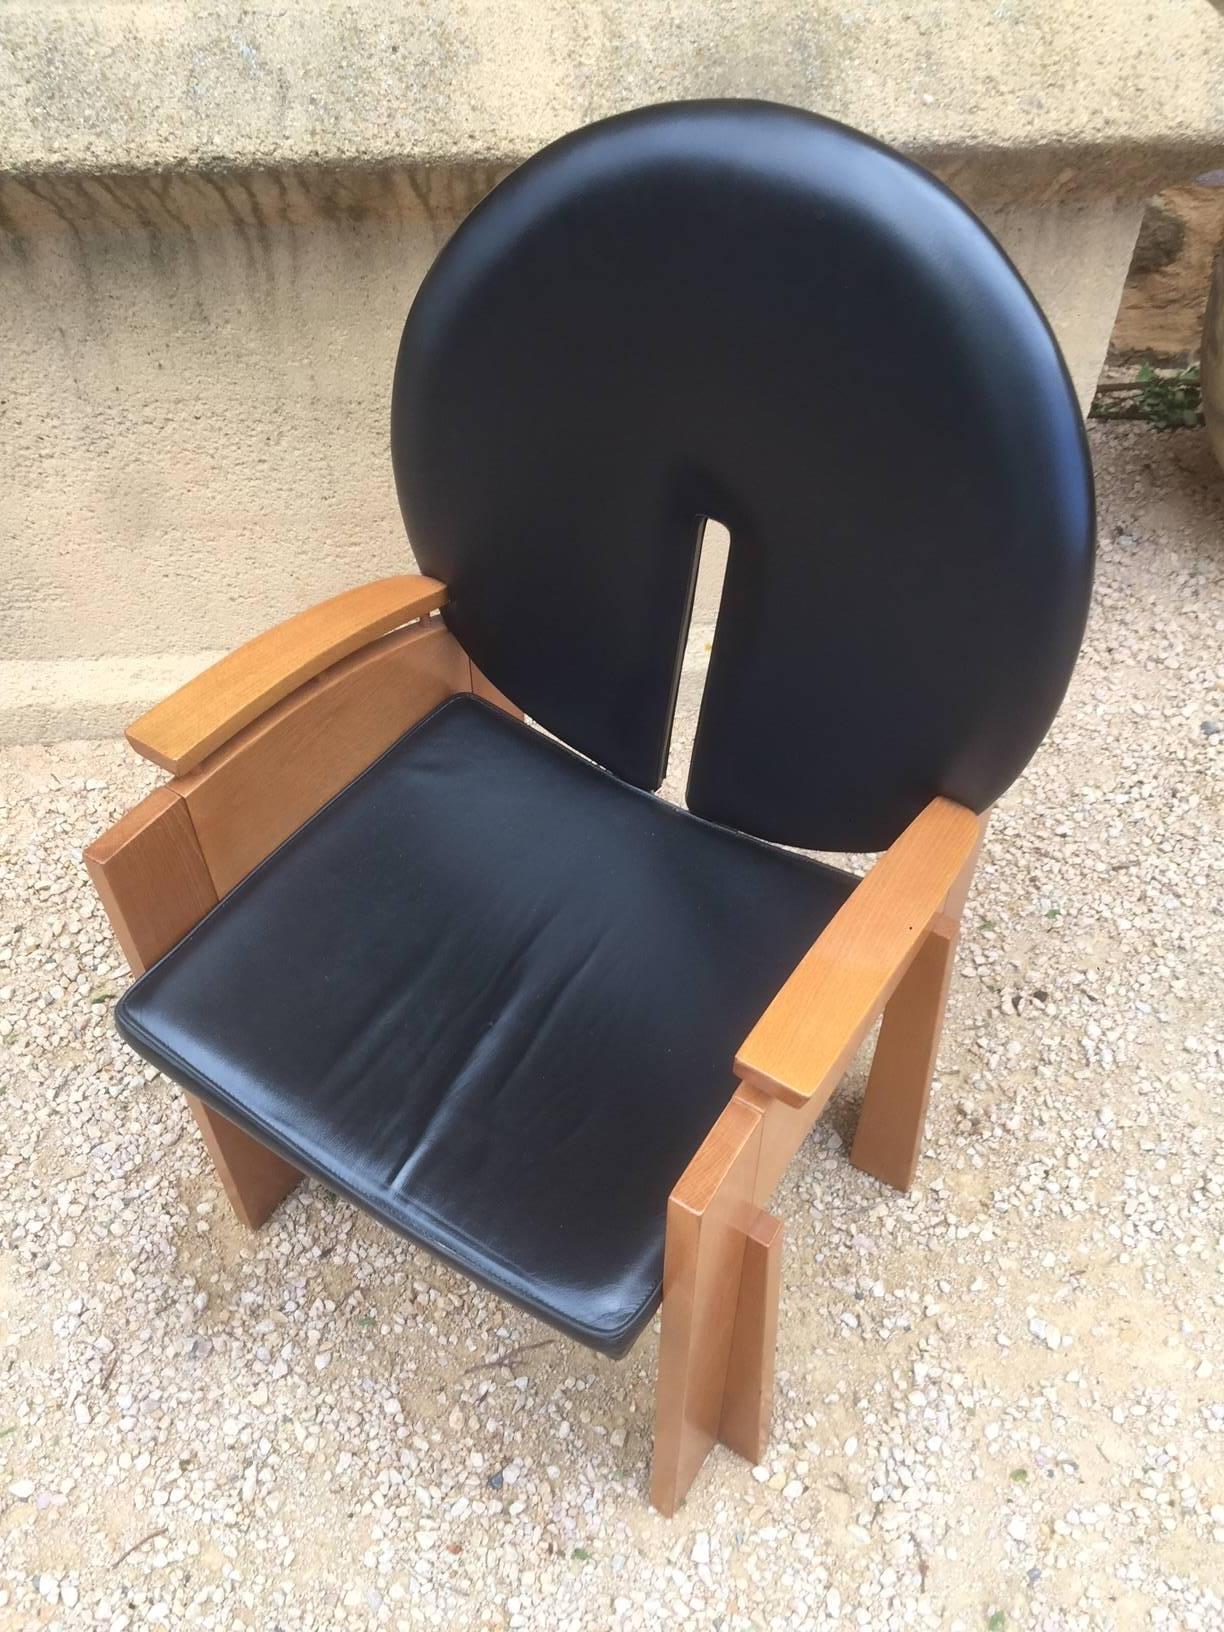 Very original and rare Italian designer armchair from the 1990s.
Rounded back, very comfortable.